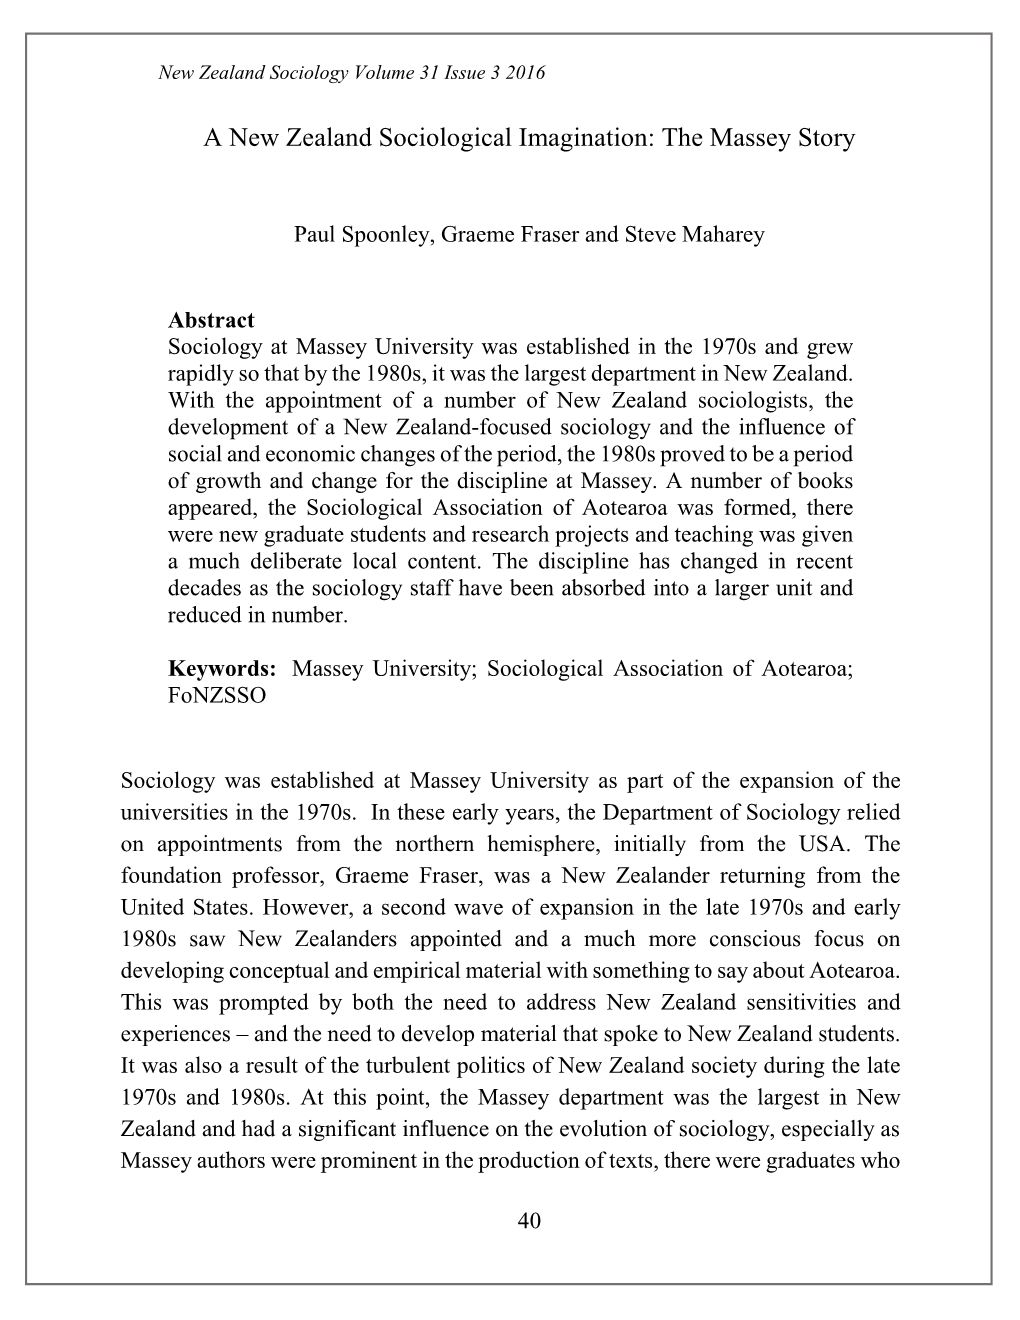 A New Zealand Sociological Imagination: the Massey Story